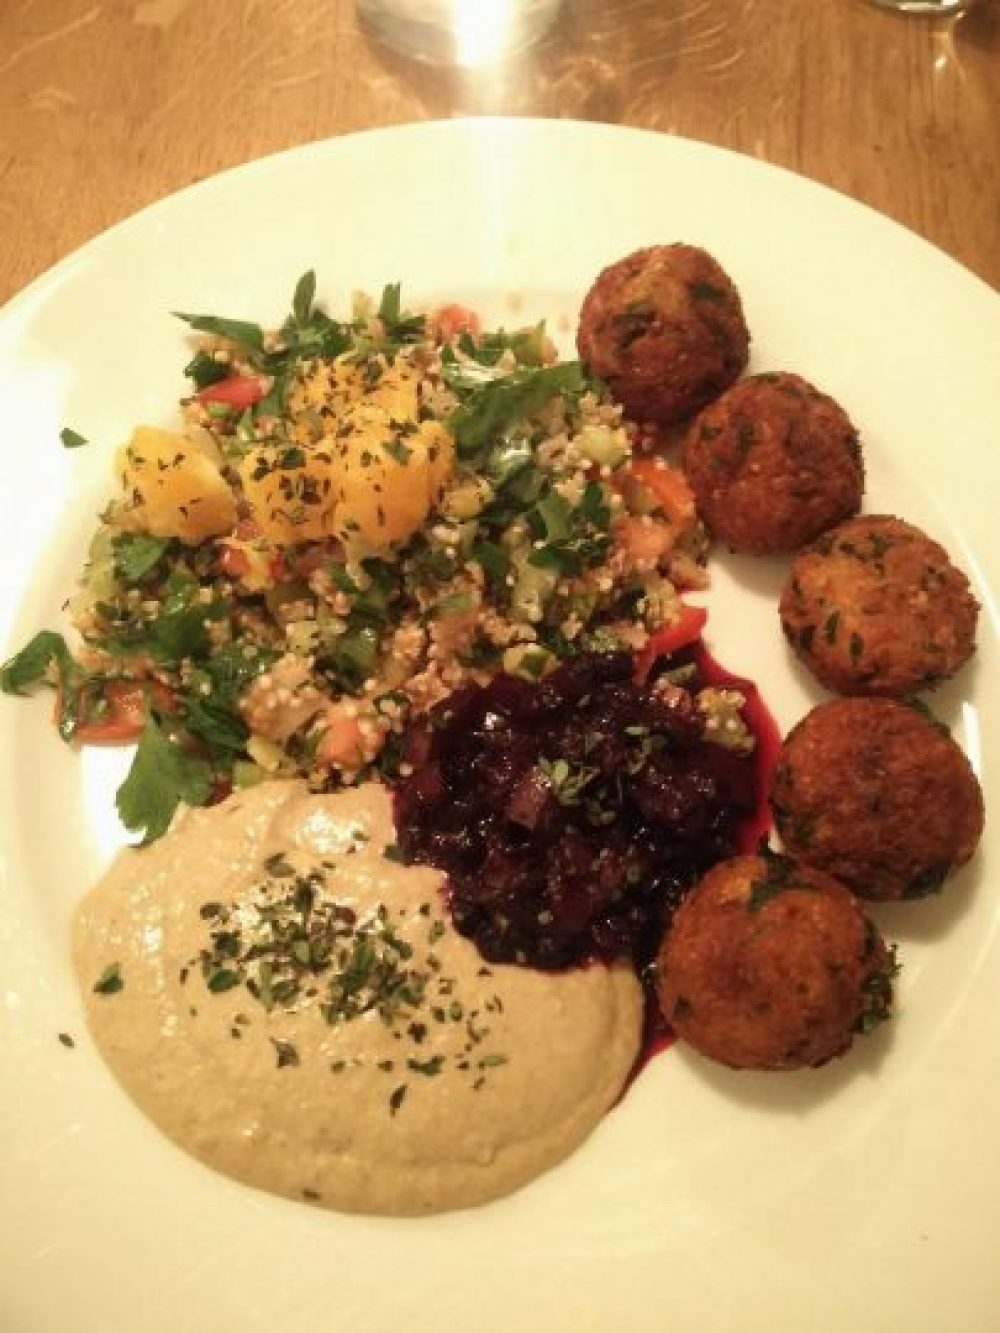 Olive restaurant's delicious vegan falafels with quinoa tabbouleh with orange and pomegranate, Maroccan salad, tahin creme and red wine grape chutney